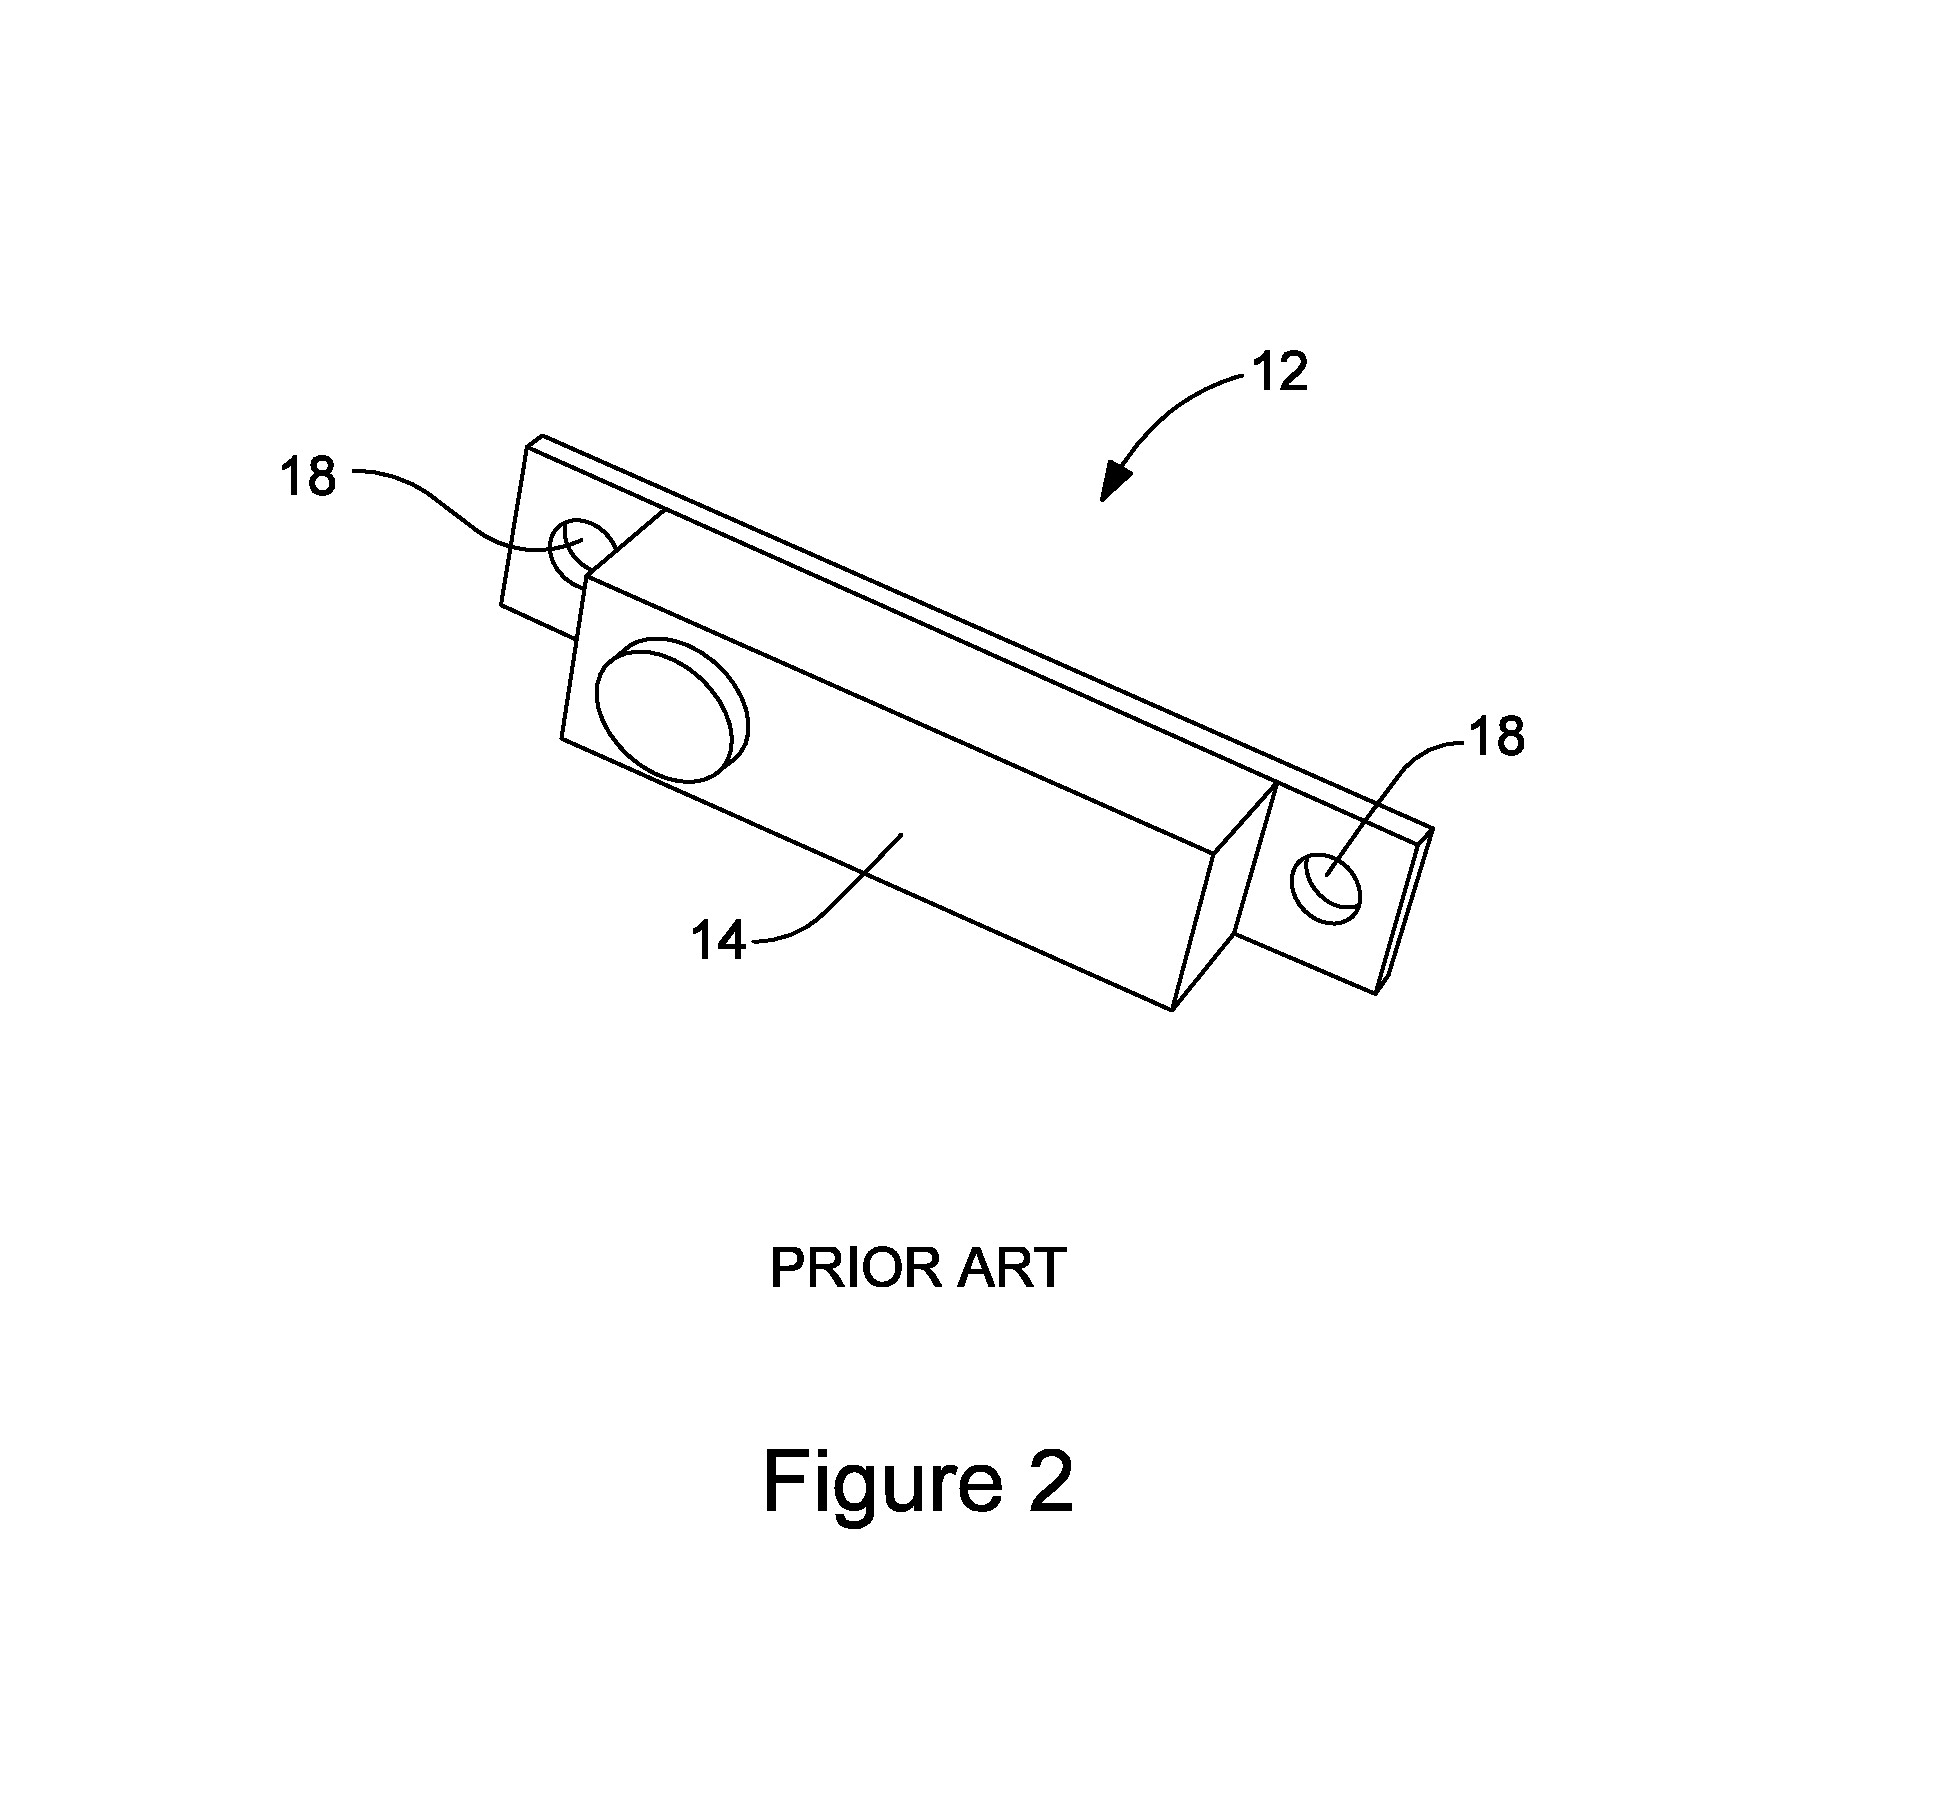 Concealed light detection and ranging system